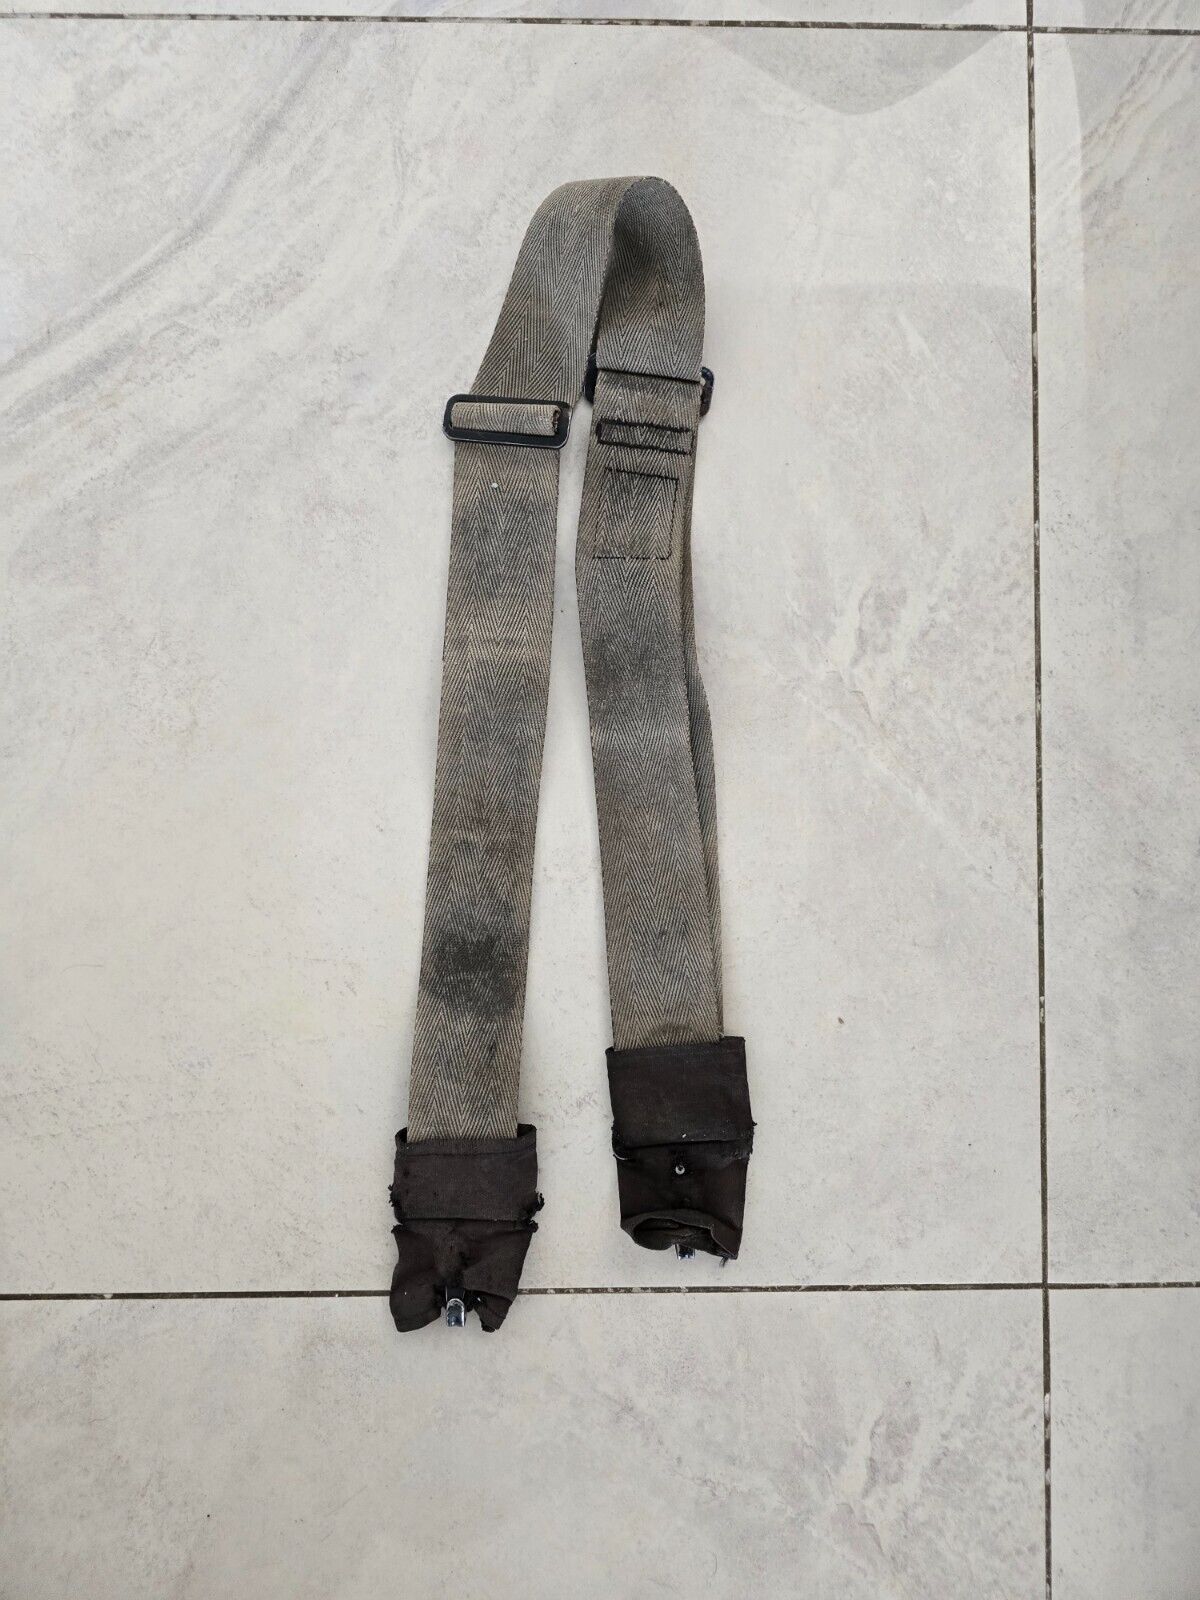 Genuine IDF Israel Army Combat Soldier Rifle Strap Sling A160